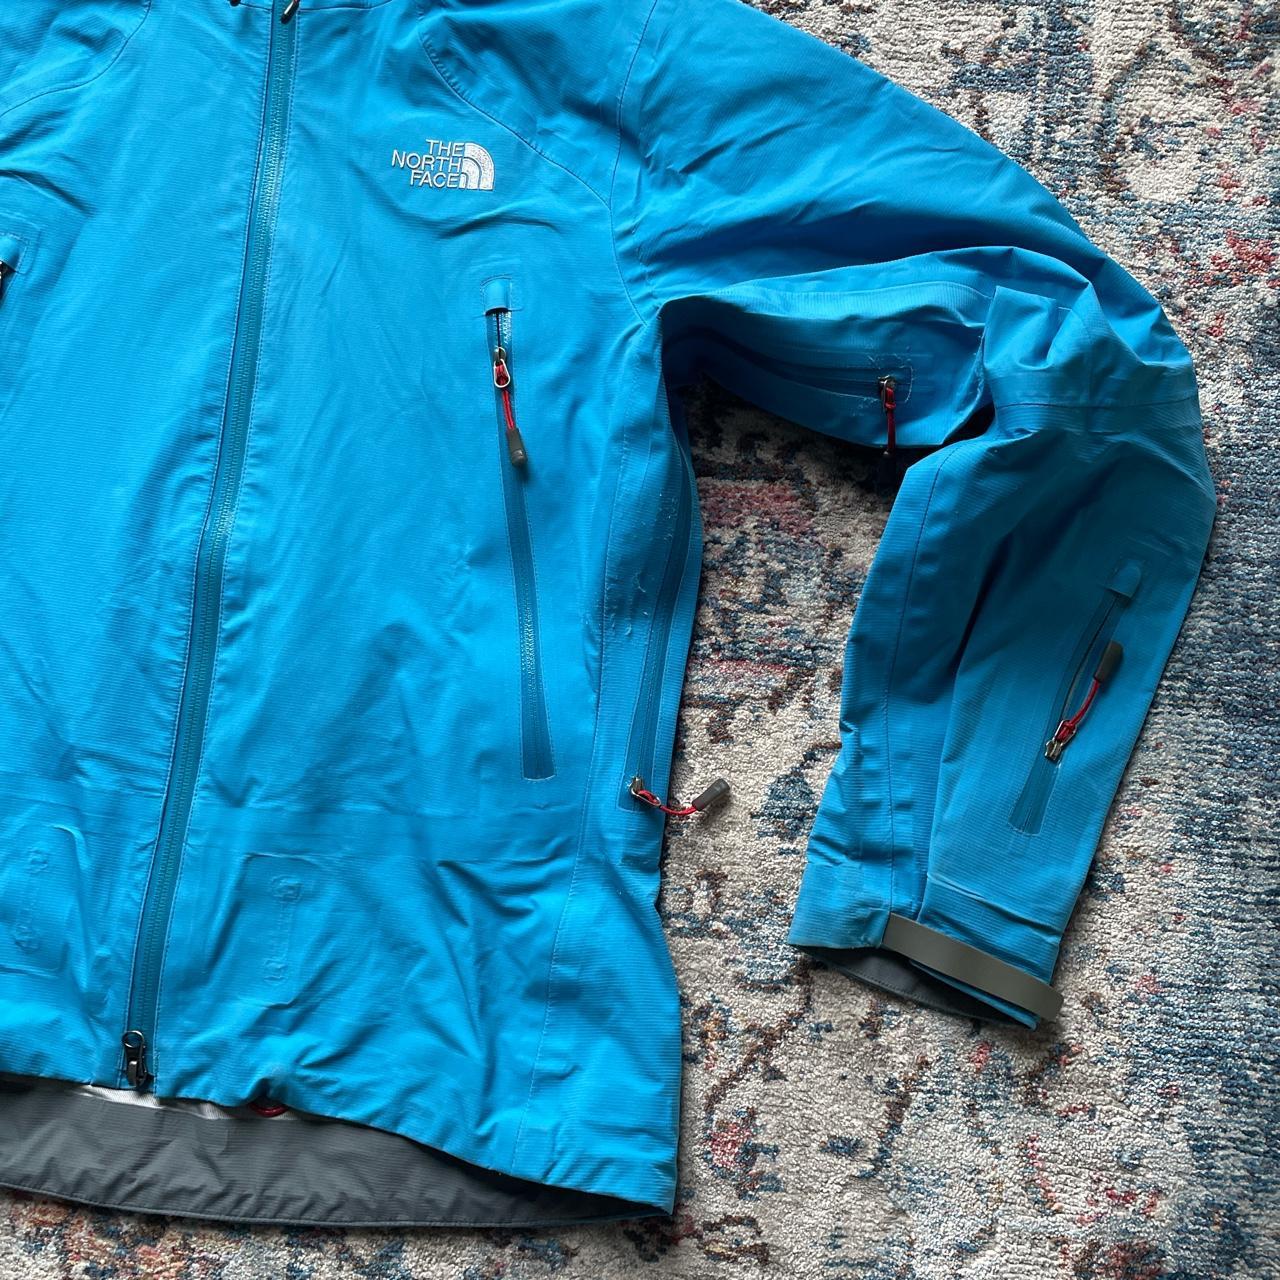 The North Face Hyvent Alpha Blue Jacket